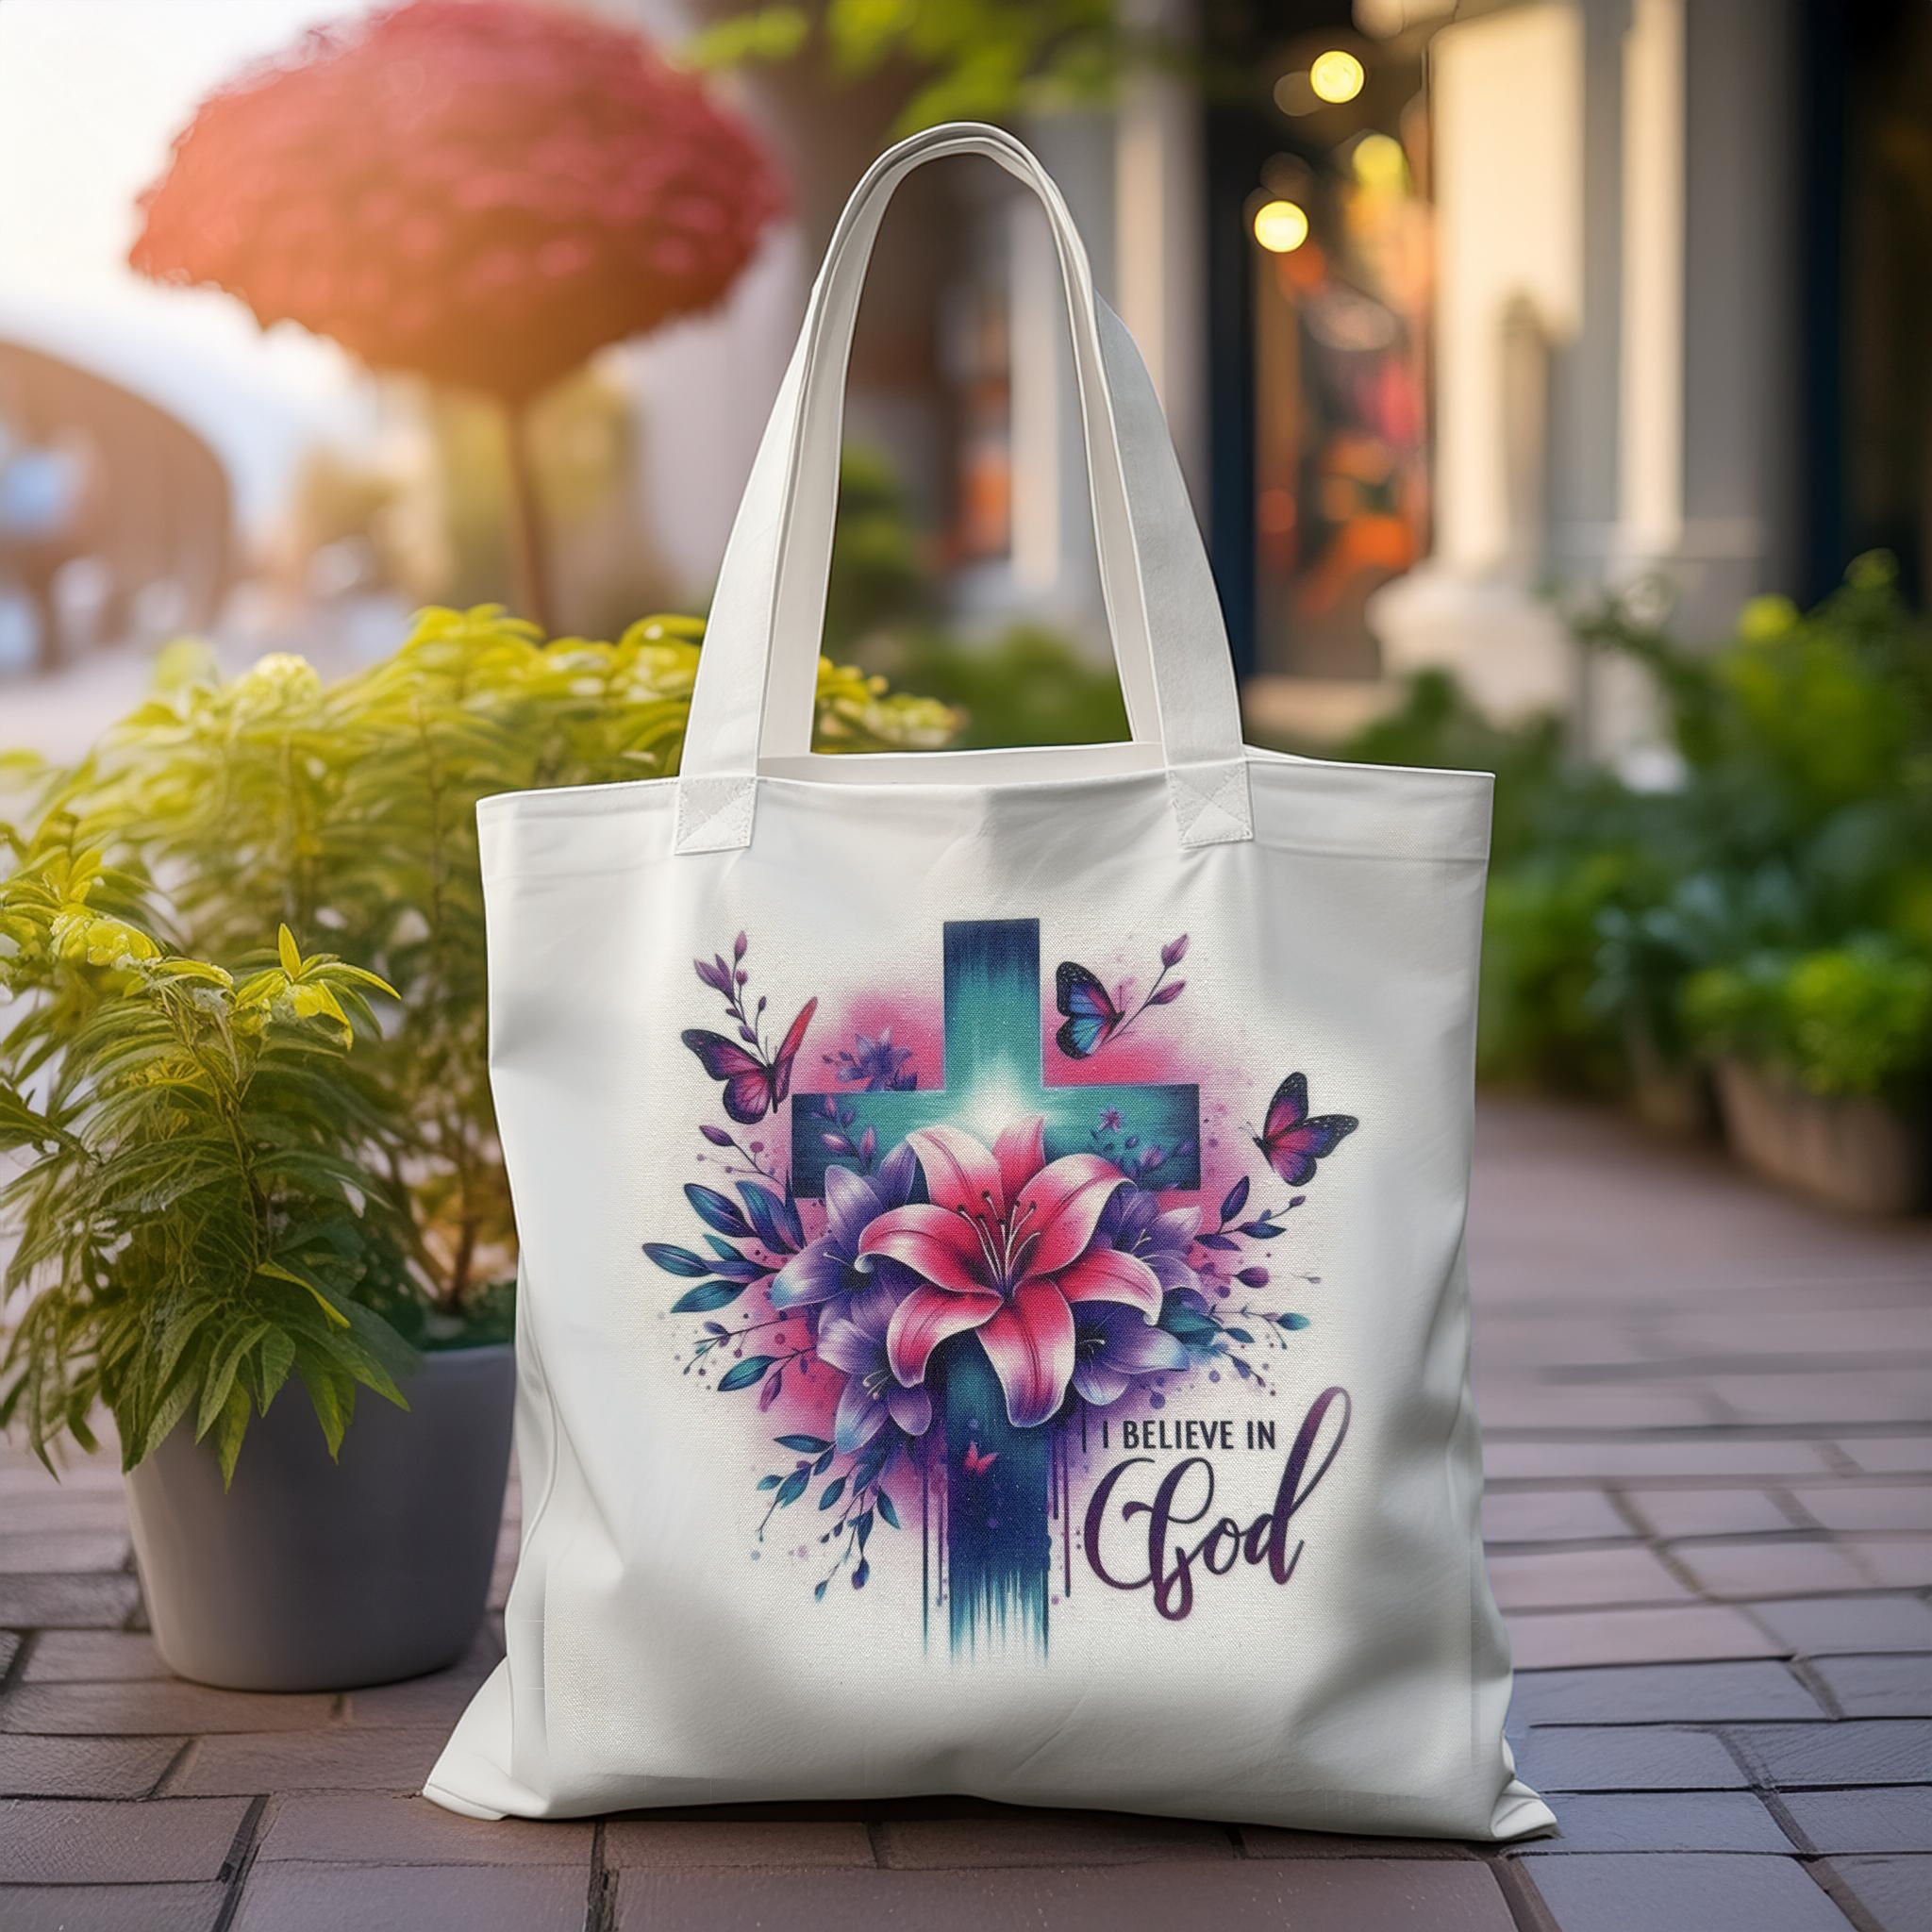 Tote Bag, Blue Cross Tote Bag, 13"x 15", White Digital Design with a Pink Lilly.